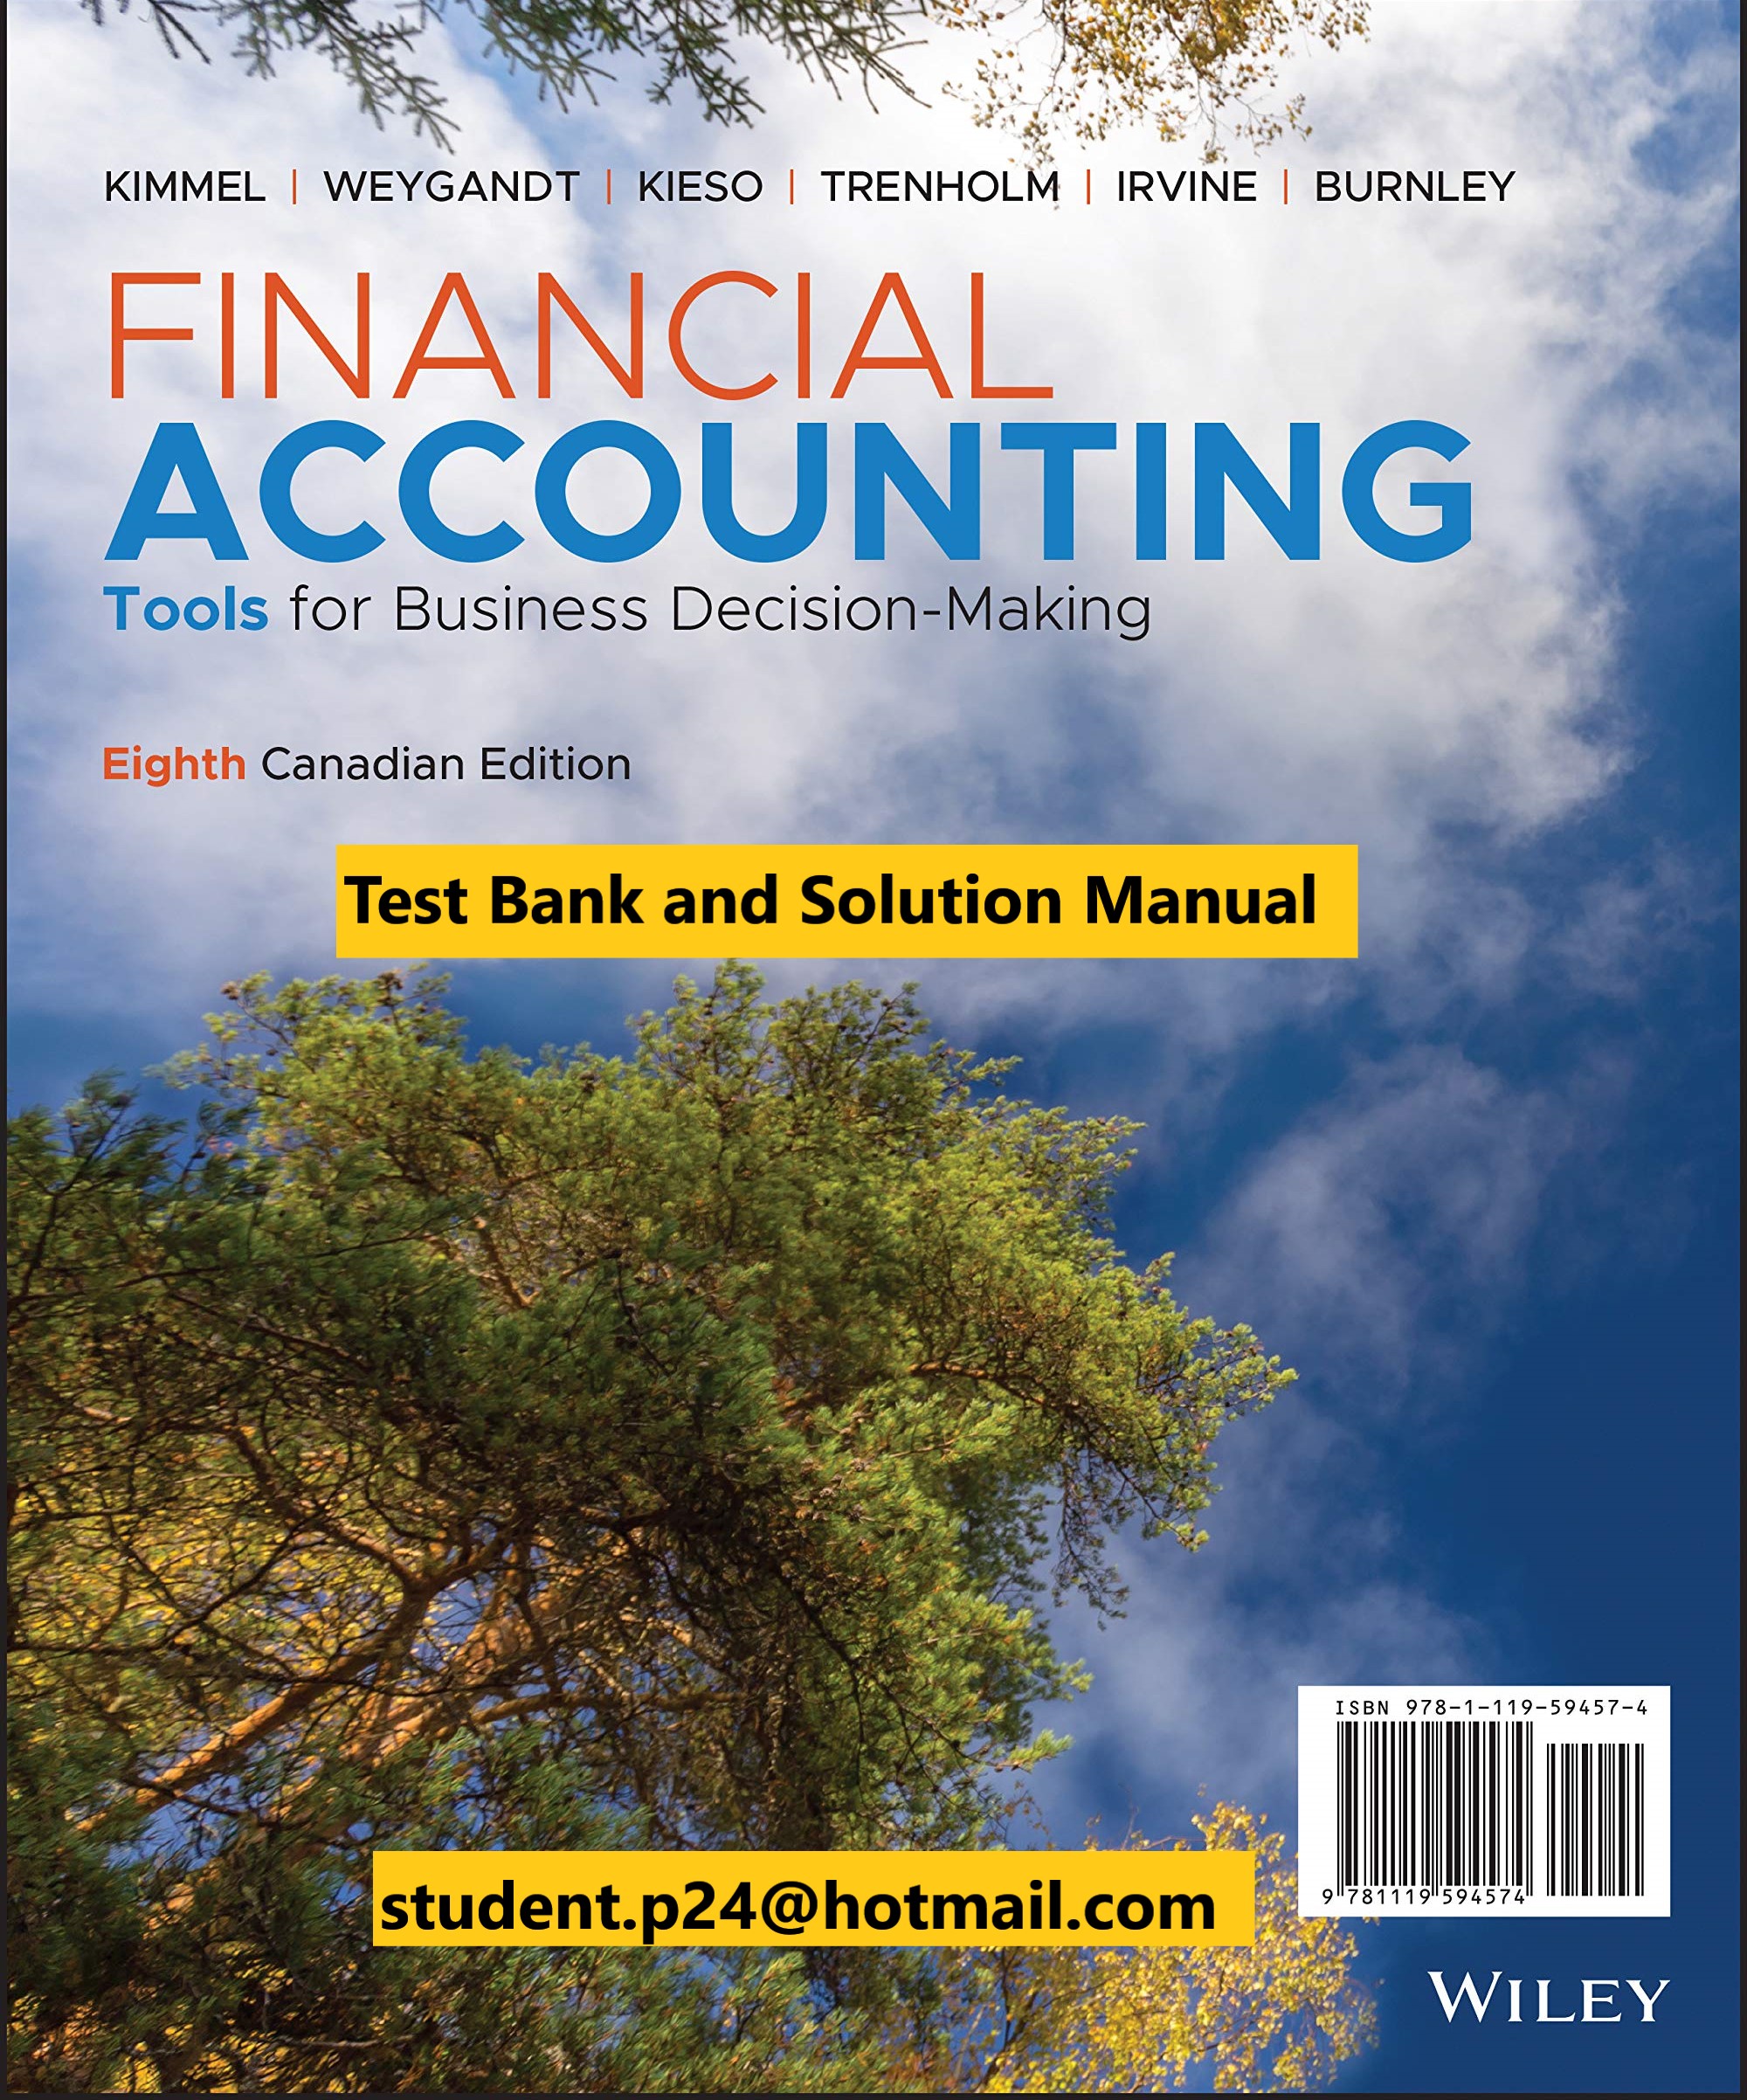 weygandt financial accounting solutions manual torrent